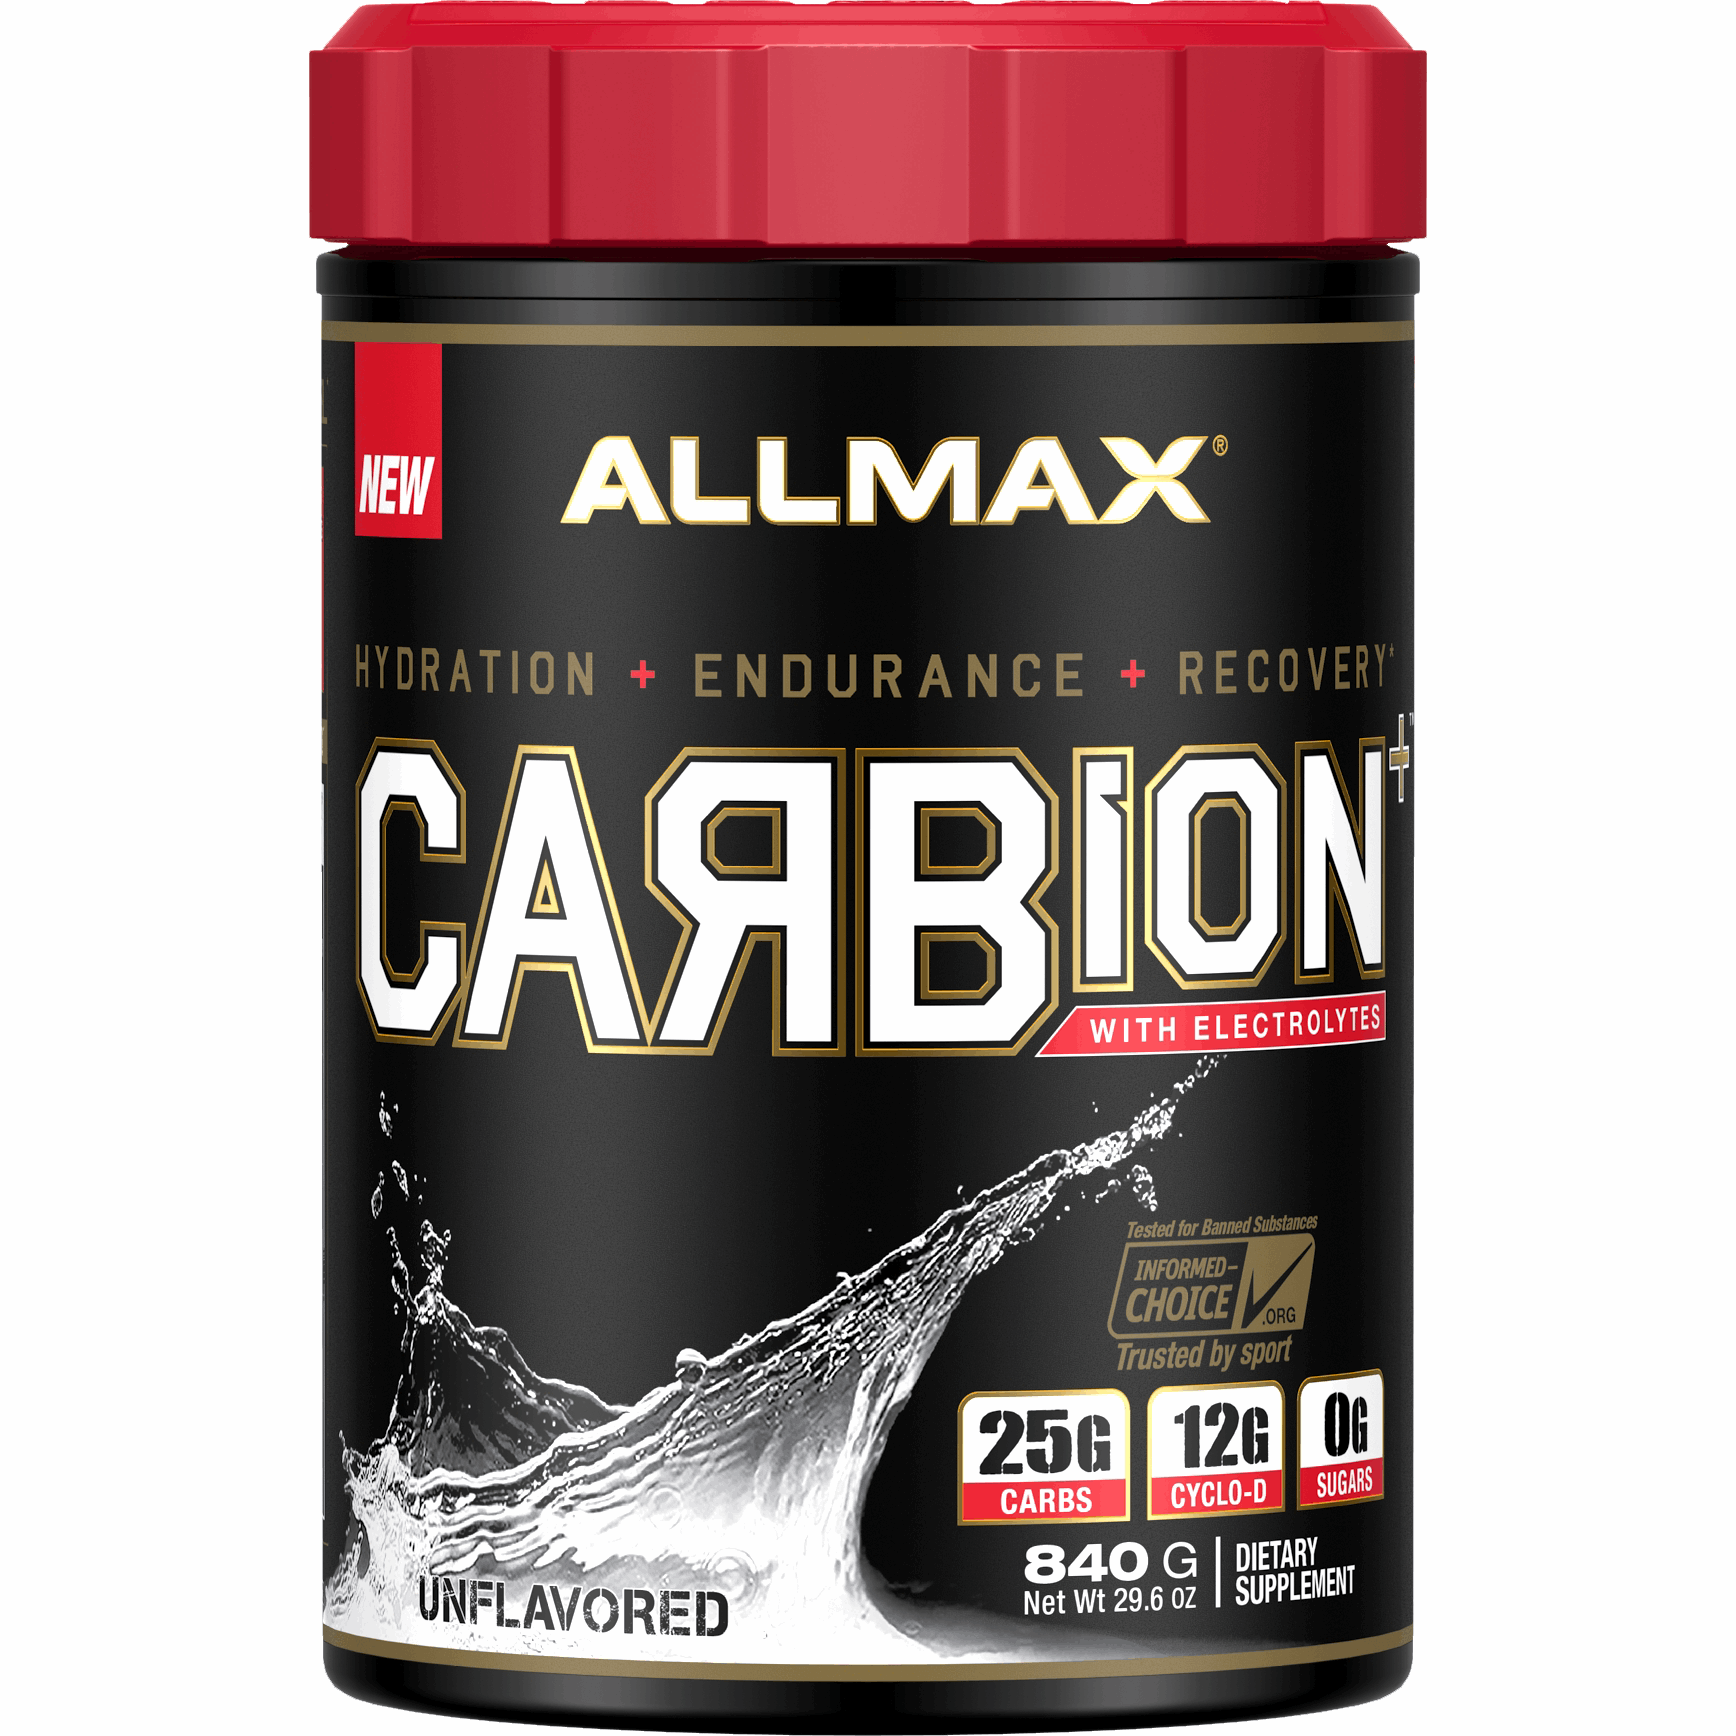 ALLMAX CARBION+Maximum Strength Electrolyte and Hydration Energy Drink (30 Servings) Carbohydrates Unflavoured Allmax Nutrition allmax-carbion-maximum-strength-electrolyte-and-hydration-energy-drink-30-servings